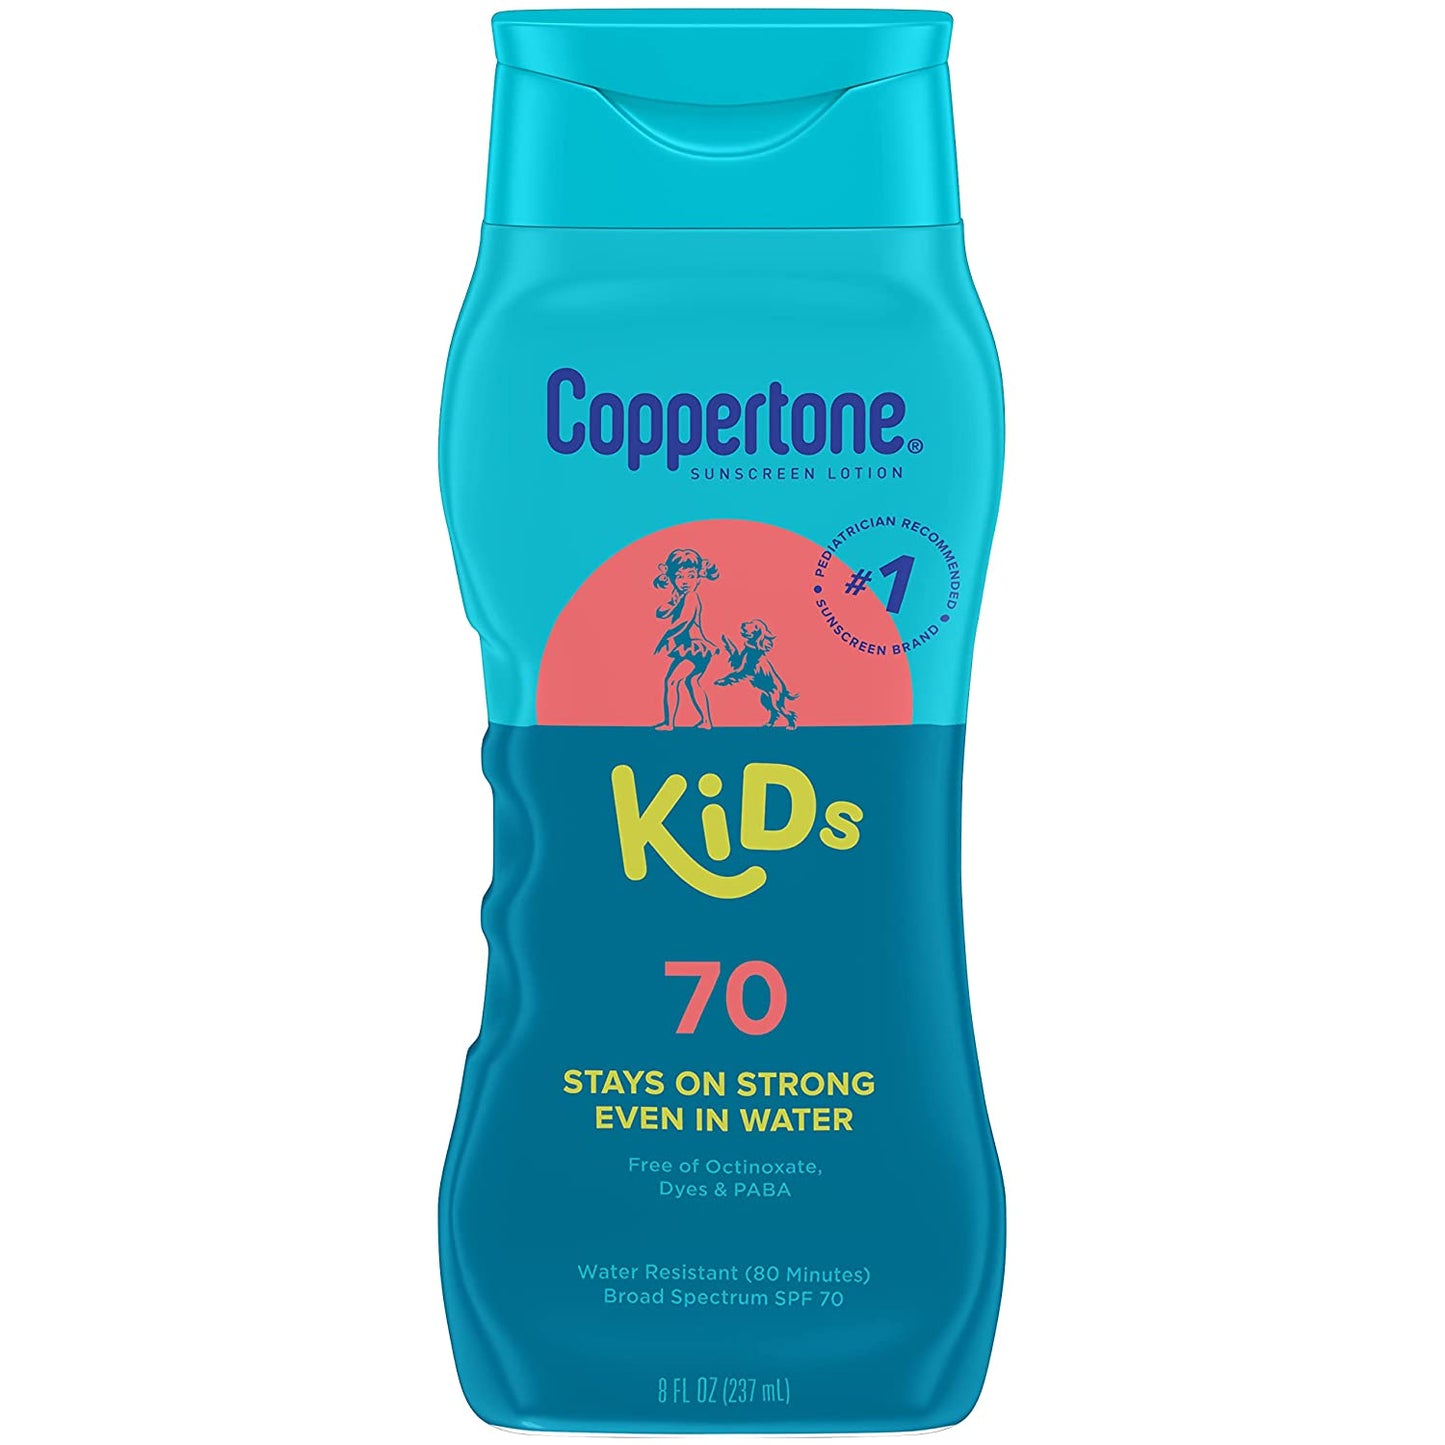 Coppertone Sunscreen Lotion Stays On Strong Even In Water Kids SPF 70 - 237ml